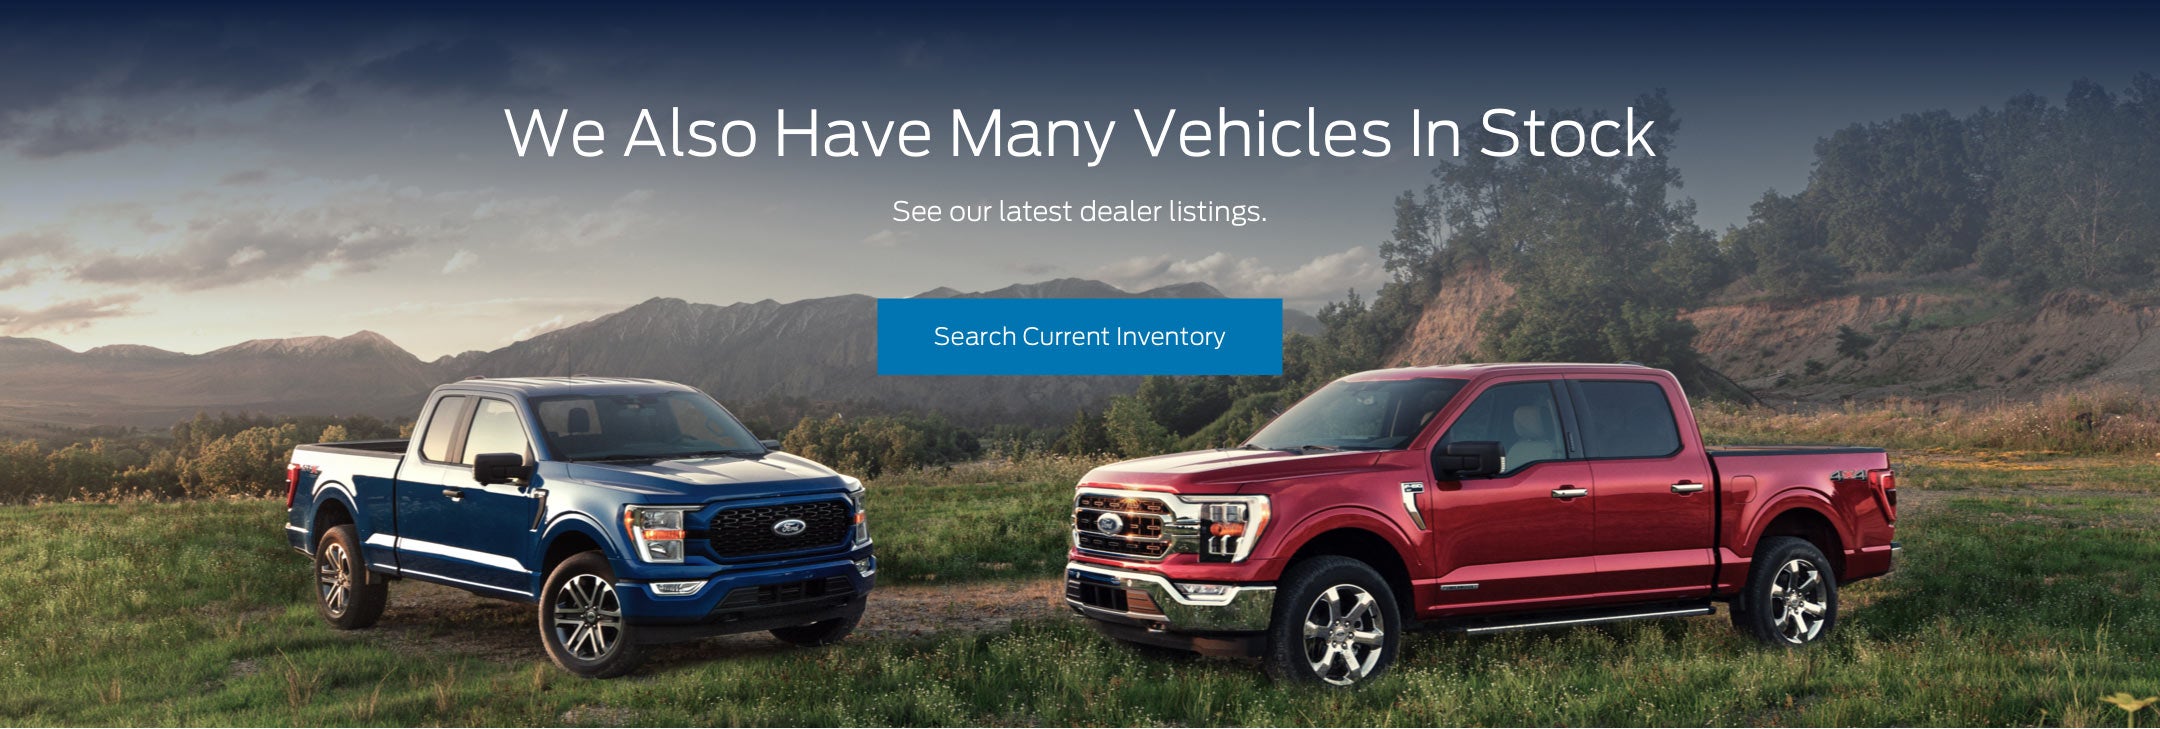 Ford vehicles in stock | Ronnie Watkins Ford in Gadsden AL